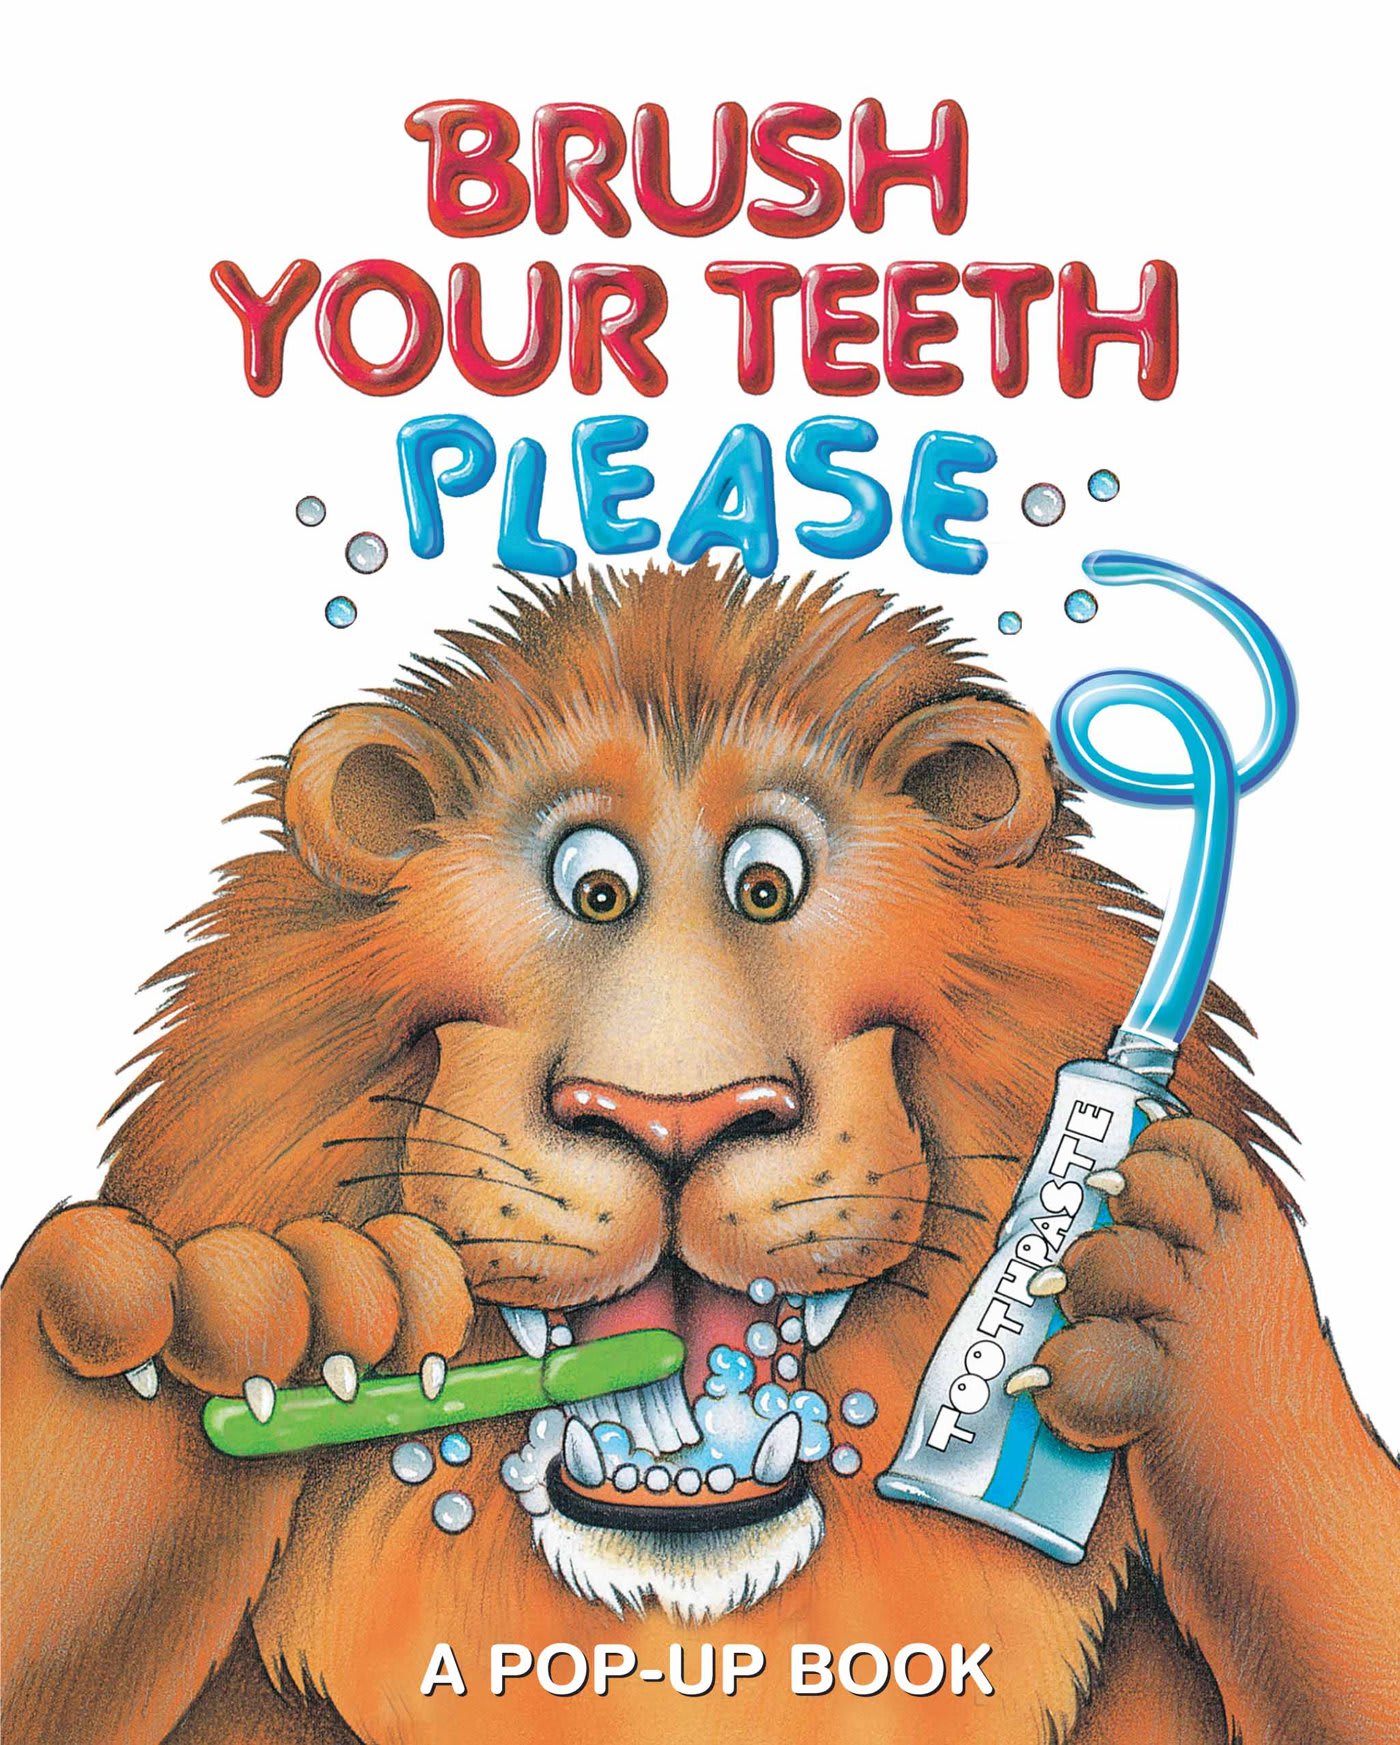 Brush Your Teeth Please, Pop-up dental health book for kids